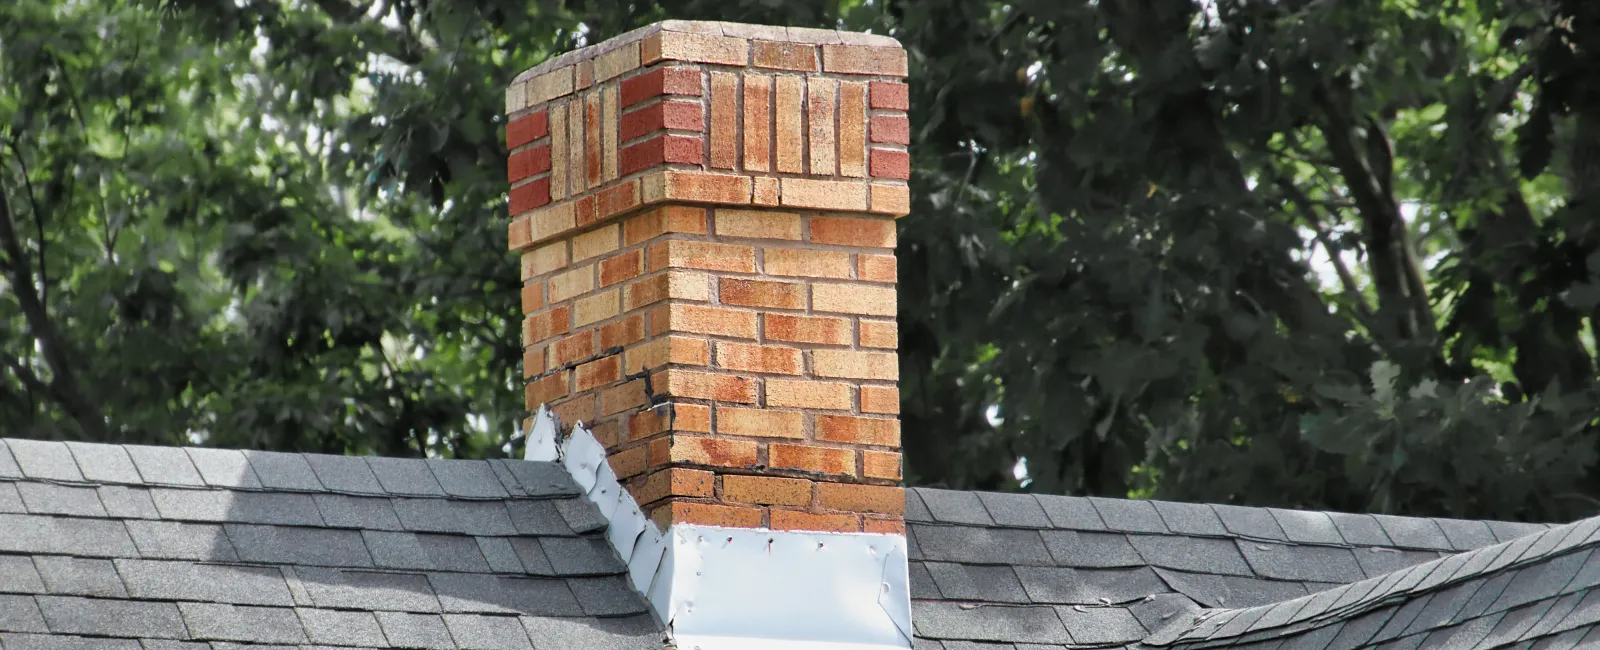 a chimney on a roof